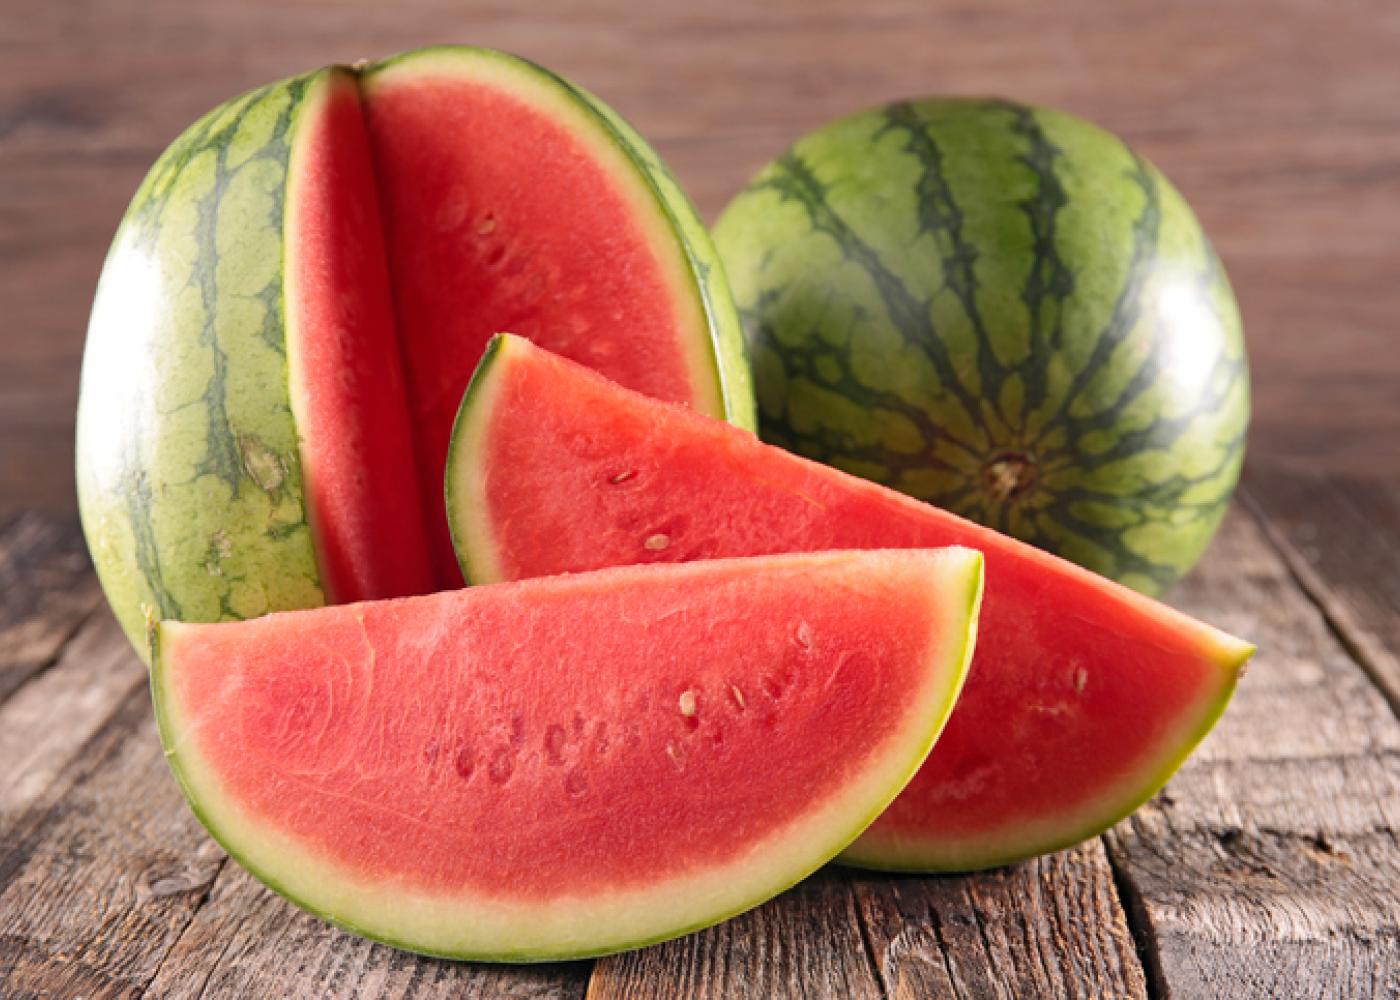 Watermelon. (Photo courtesy of U.S. Department of Agriculture SNAP-Ed Connection.)